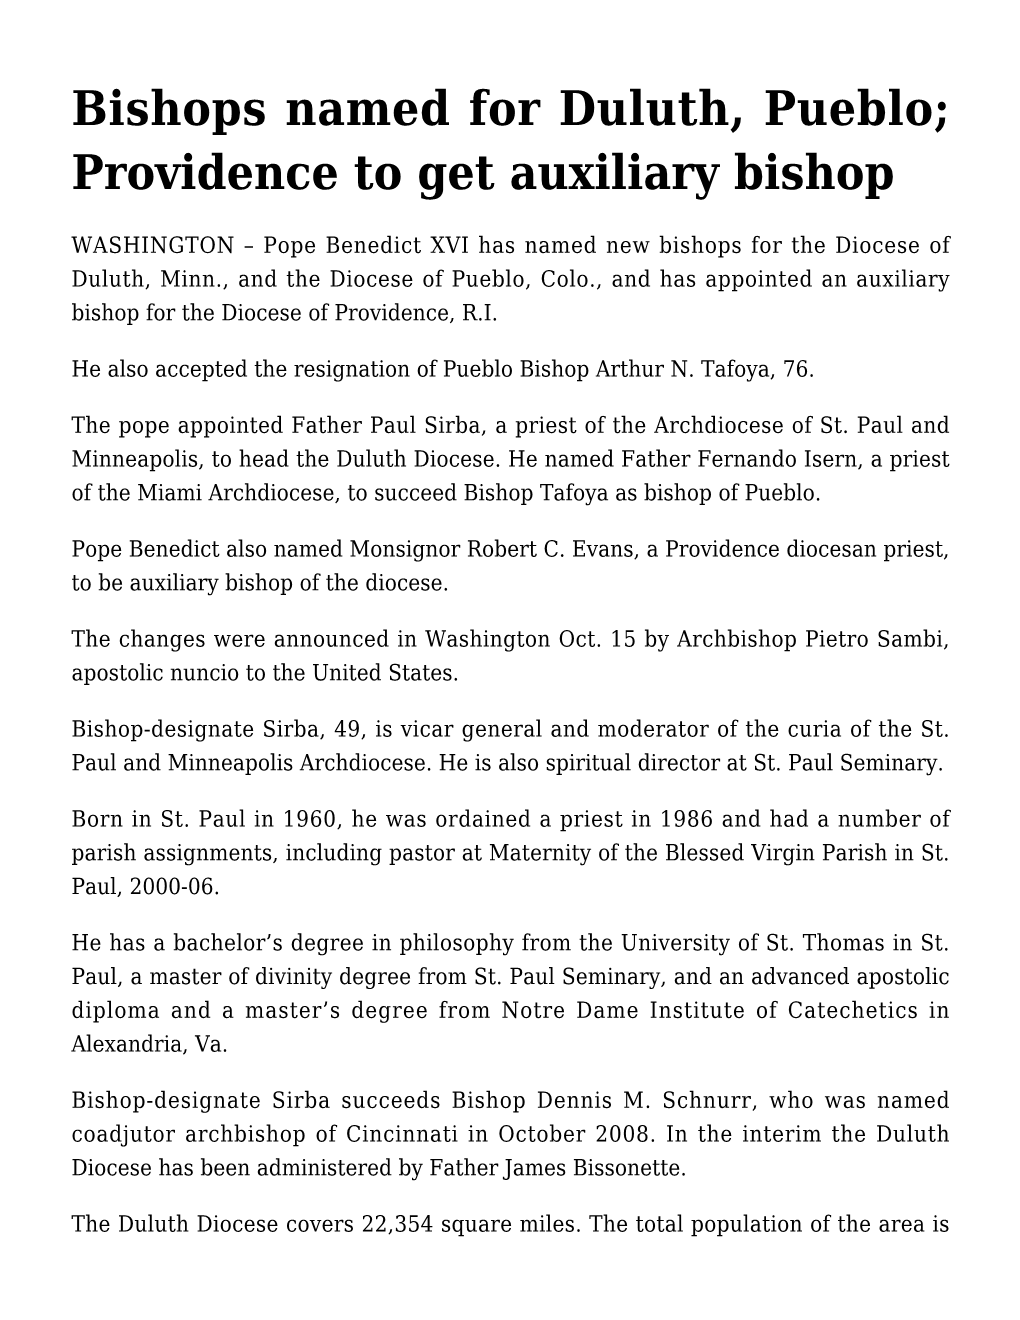 Bishops Named for Duluth, Pueblo; Providence to Get Auxiliary Bishop